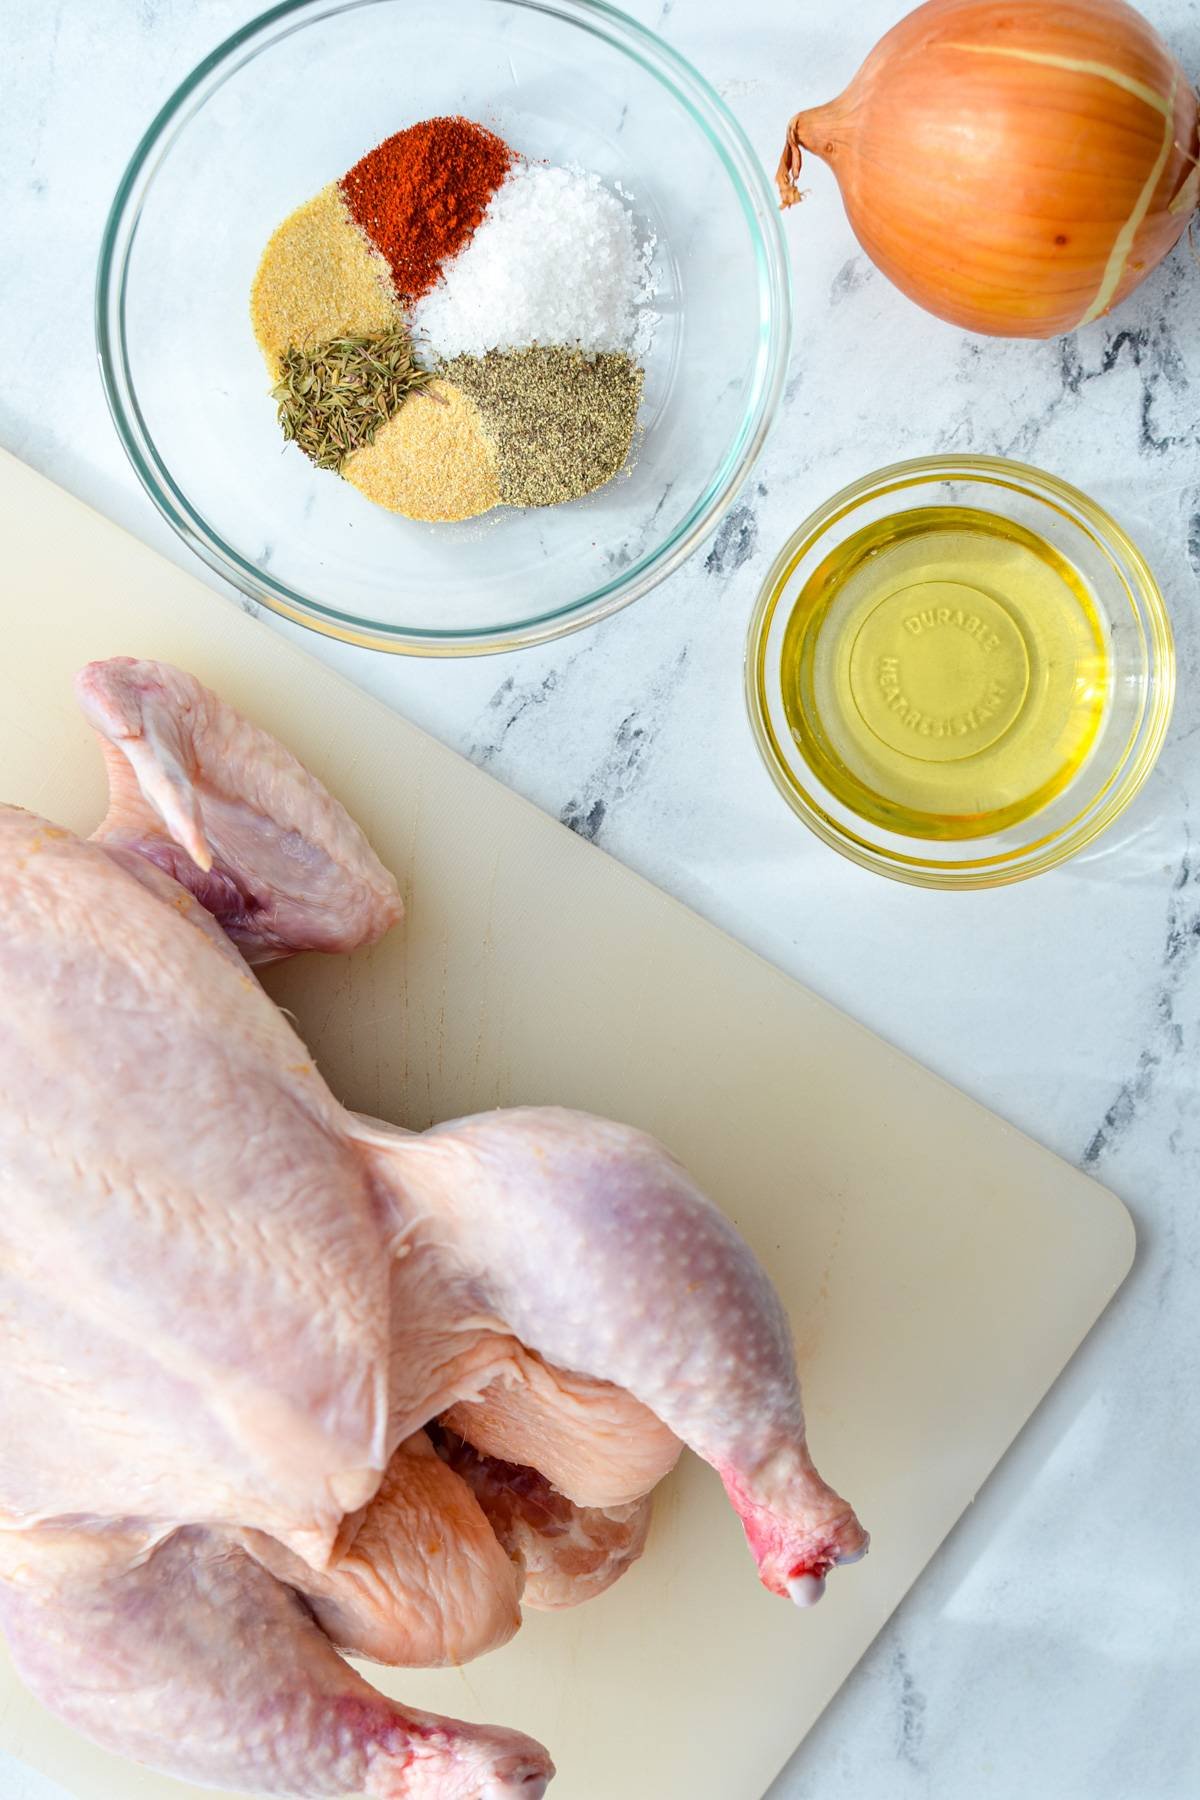 The ingredients needed to make an air fryer whole chicken: chicken, oil, onion, and seasonings.